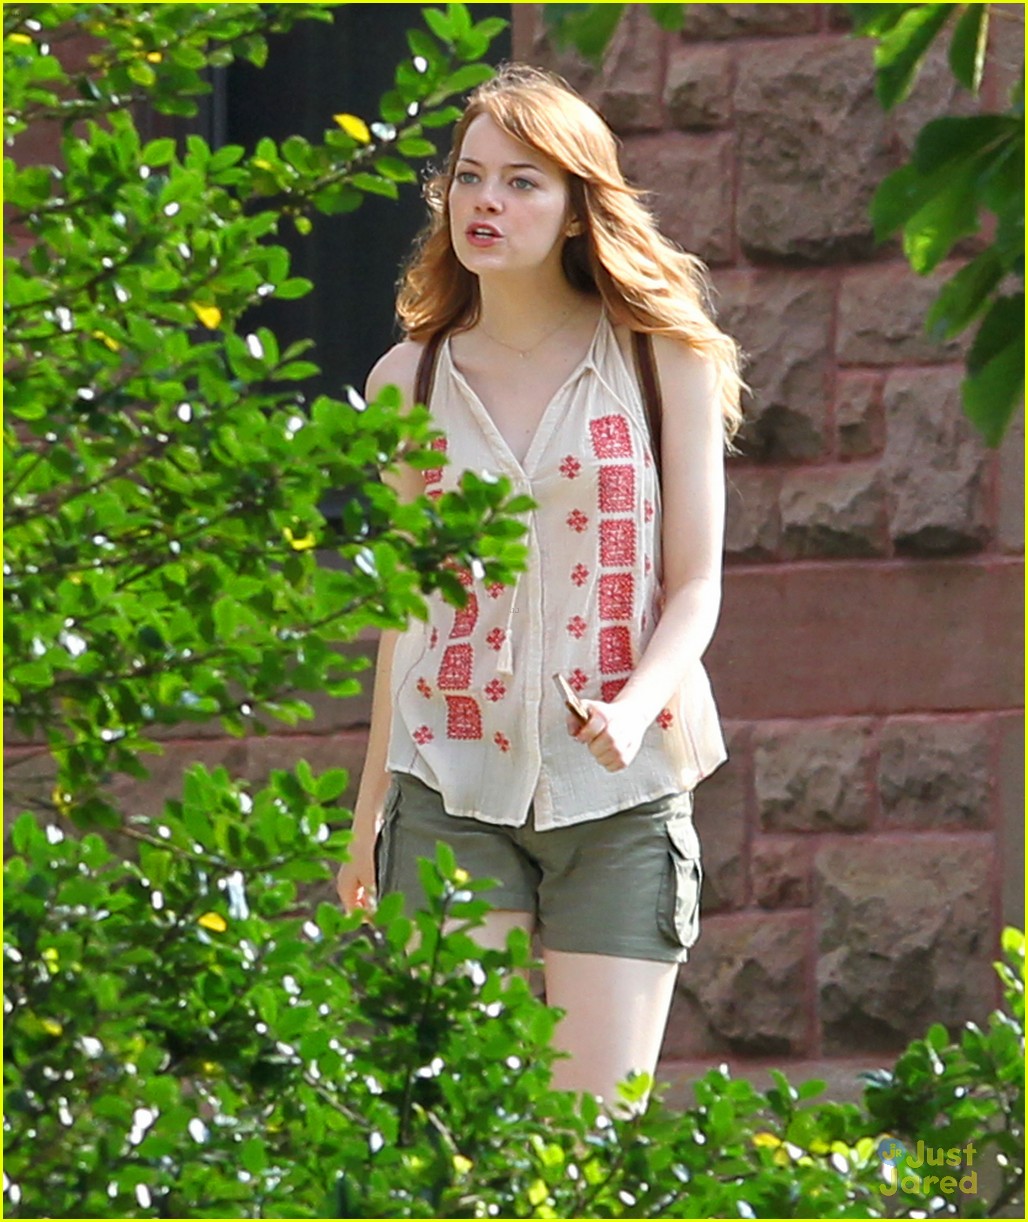 emma stone is having a fit for a scene woody allen film 10